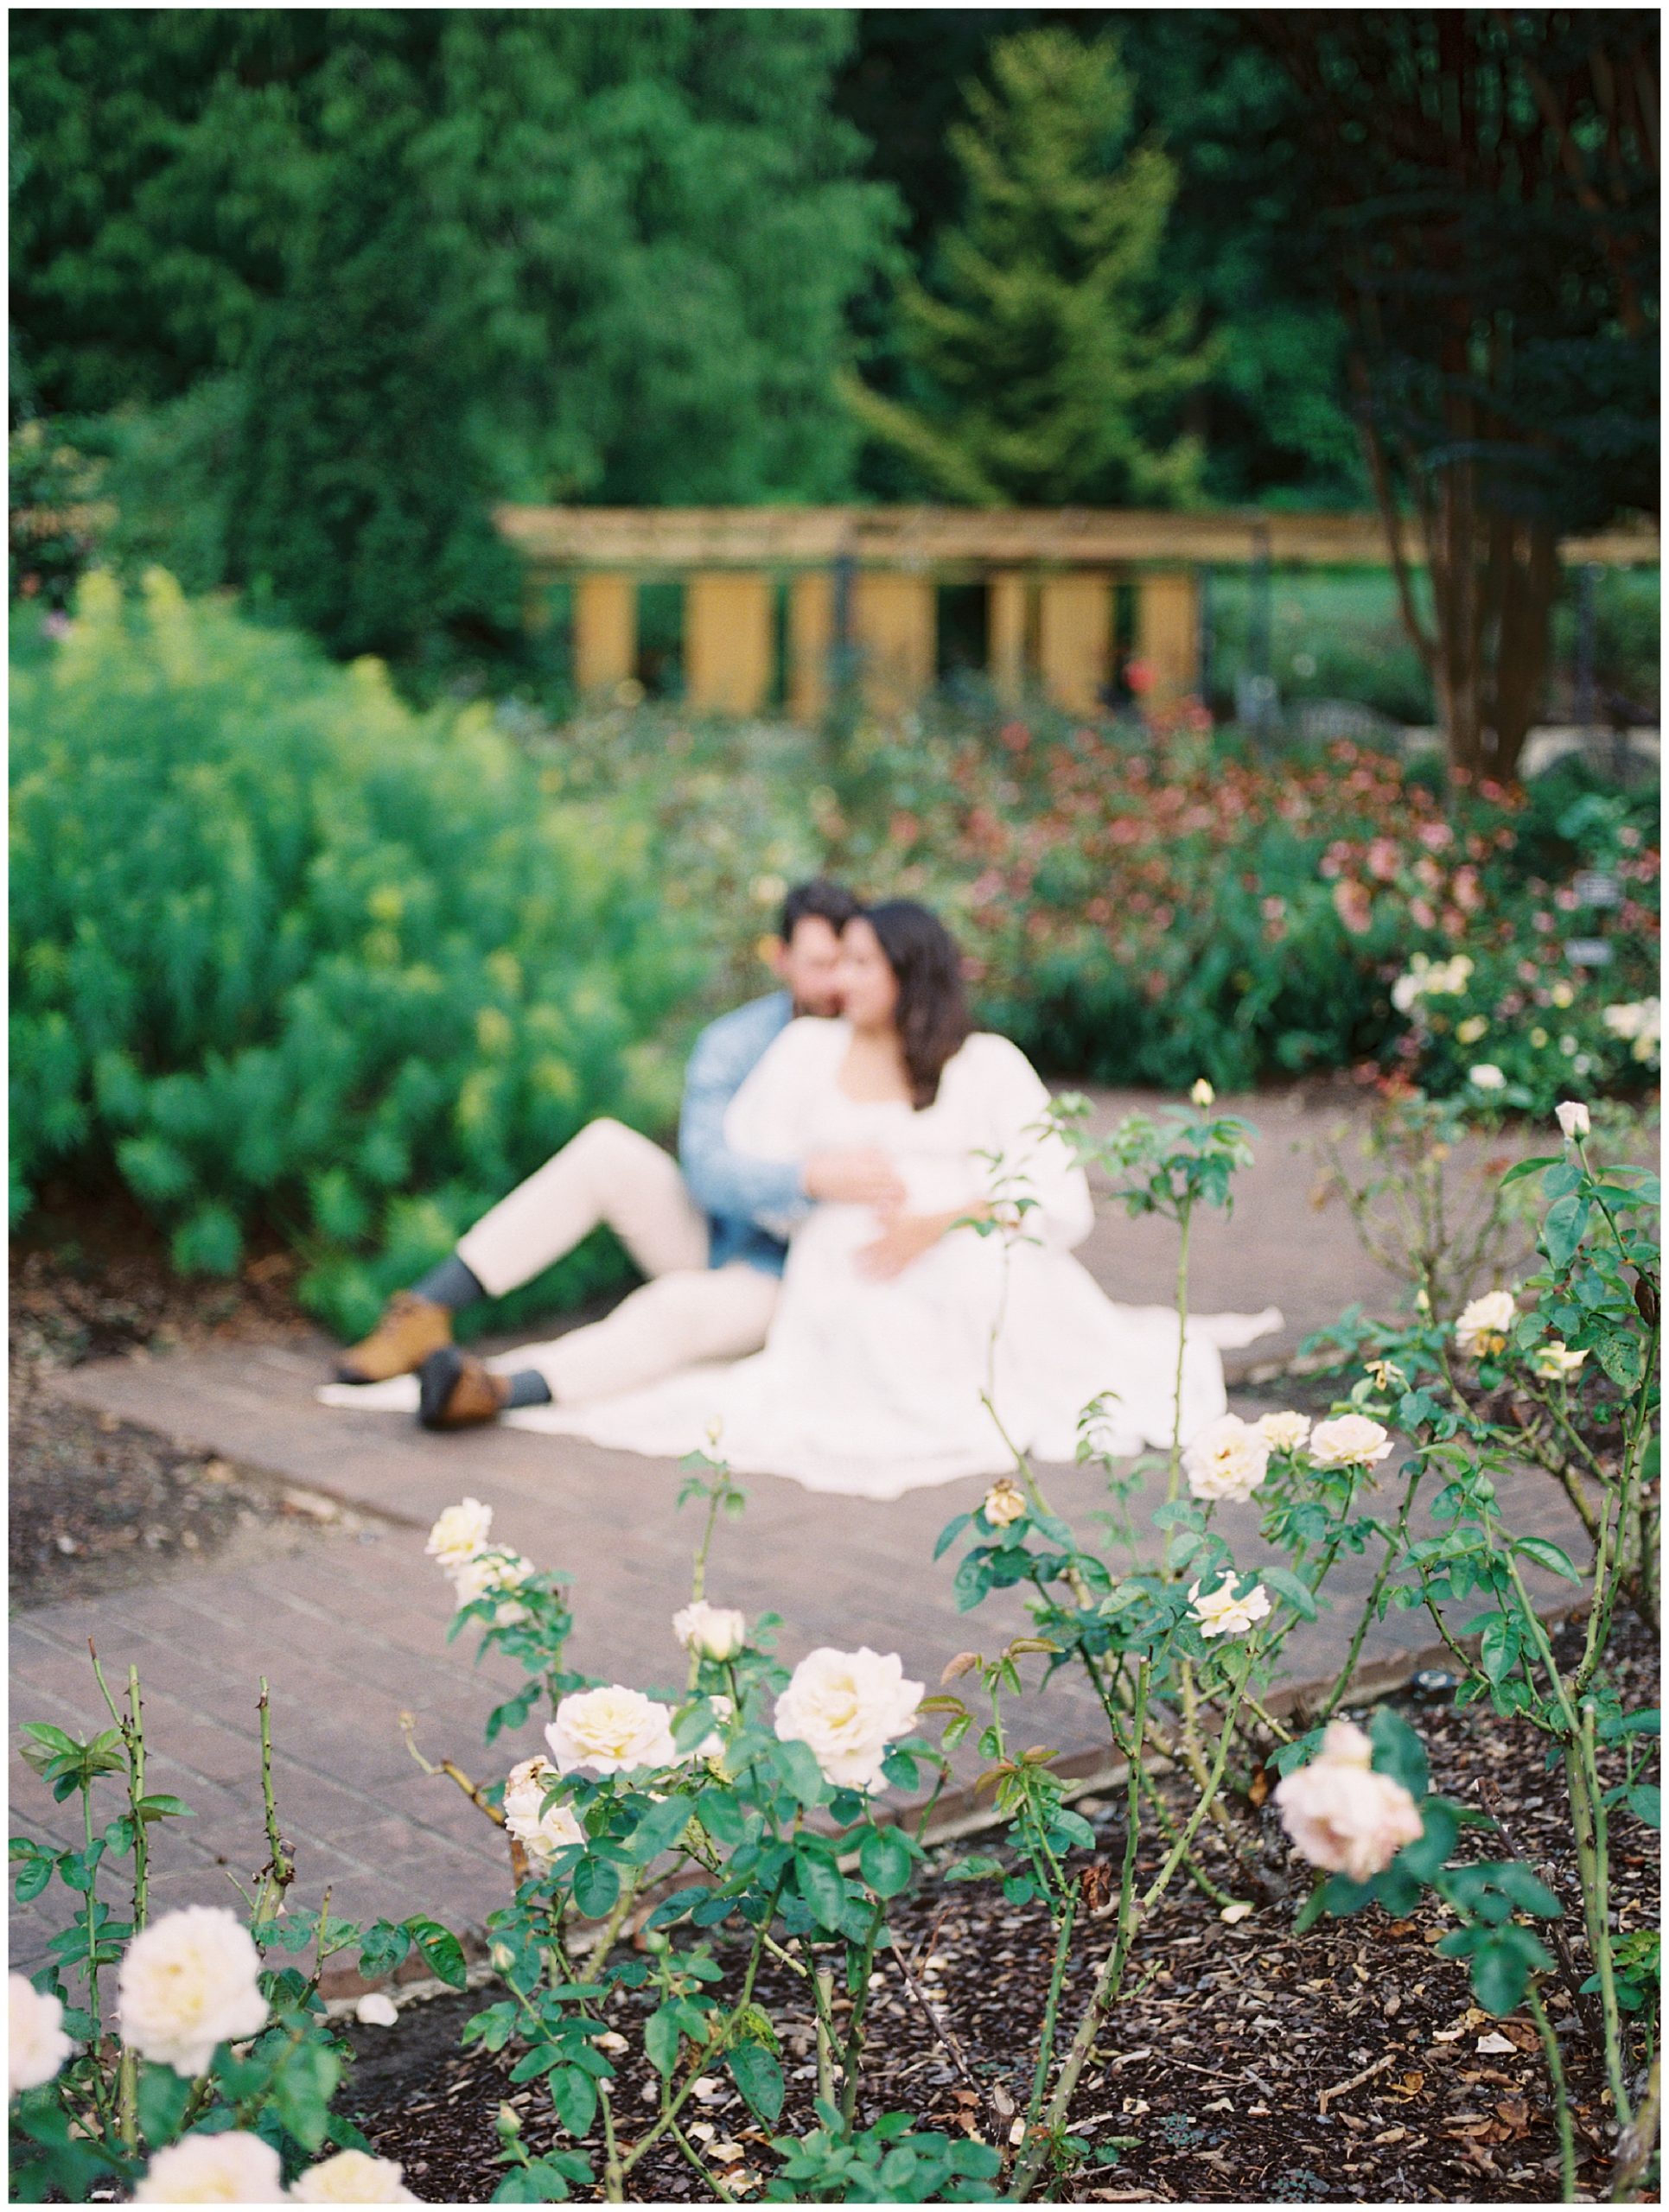 Out of focus image of expecting couple sitting in a garden during their floral maternity session.